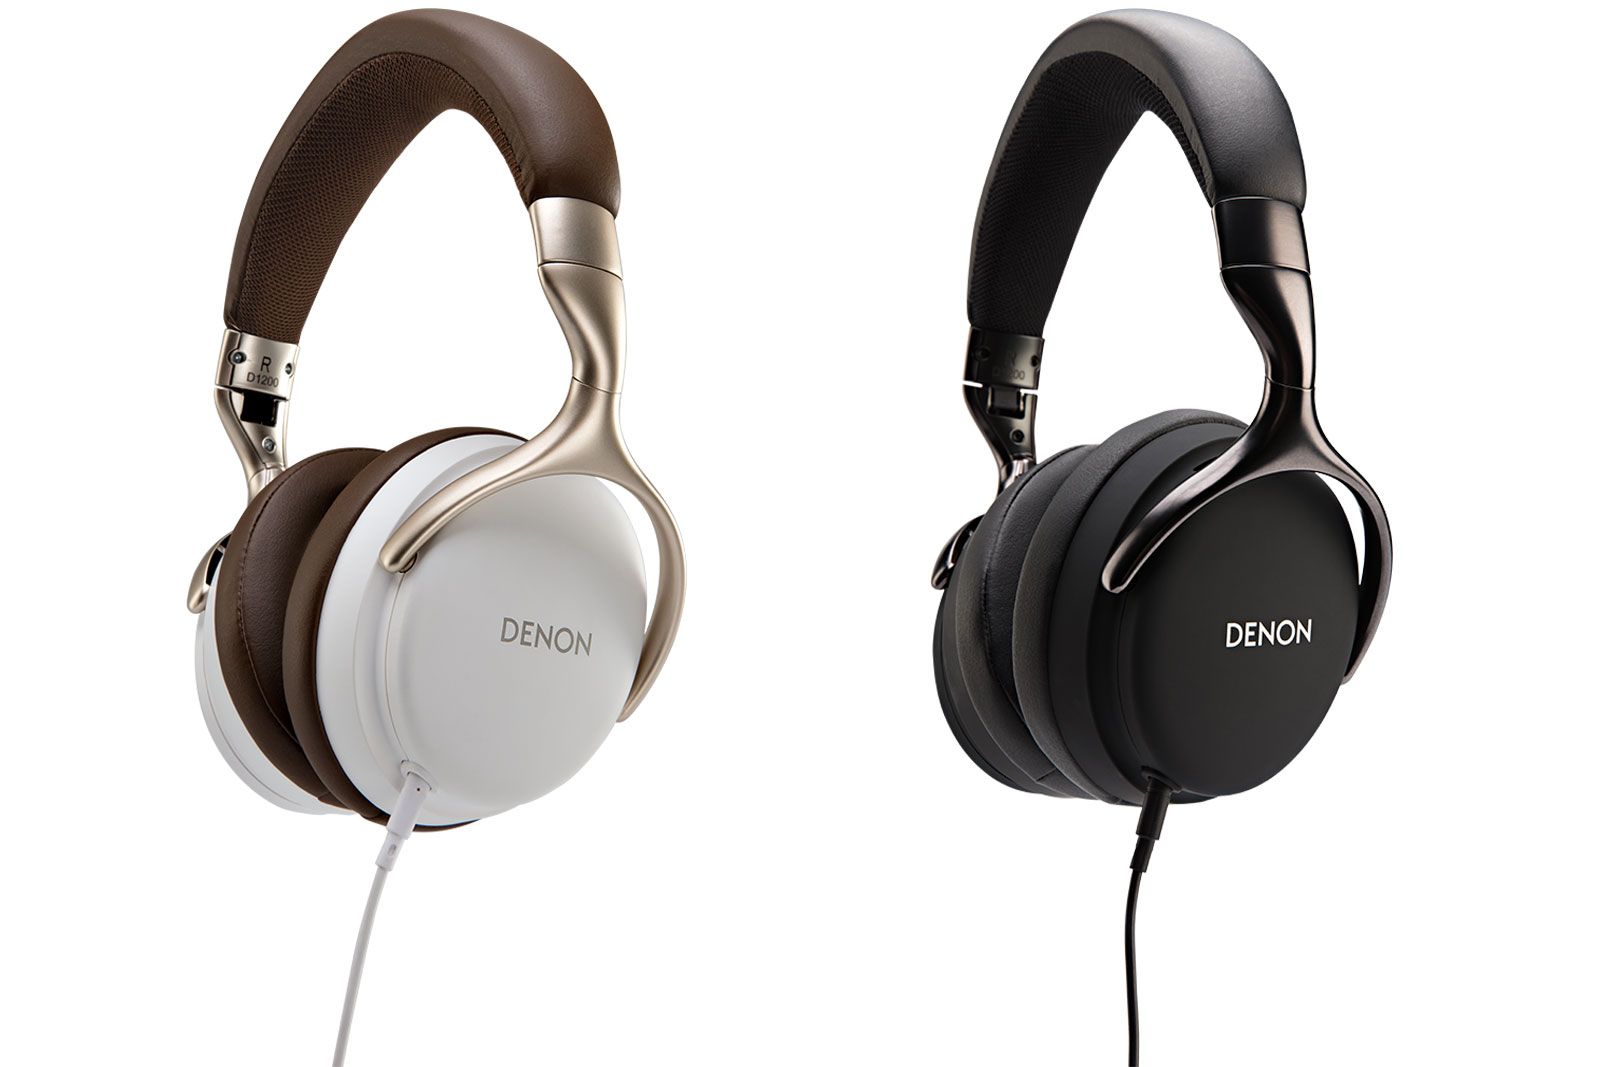 Denon AH-D1200 headphones offer style and substance on-the-go image 1